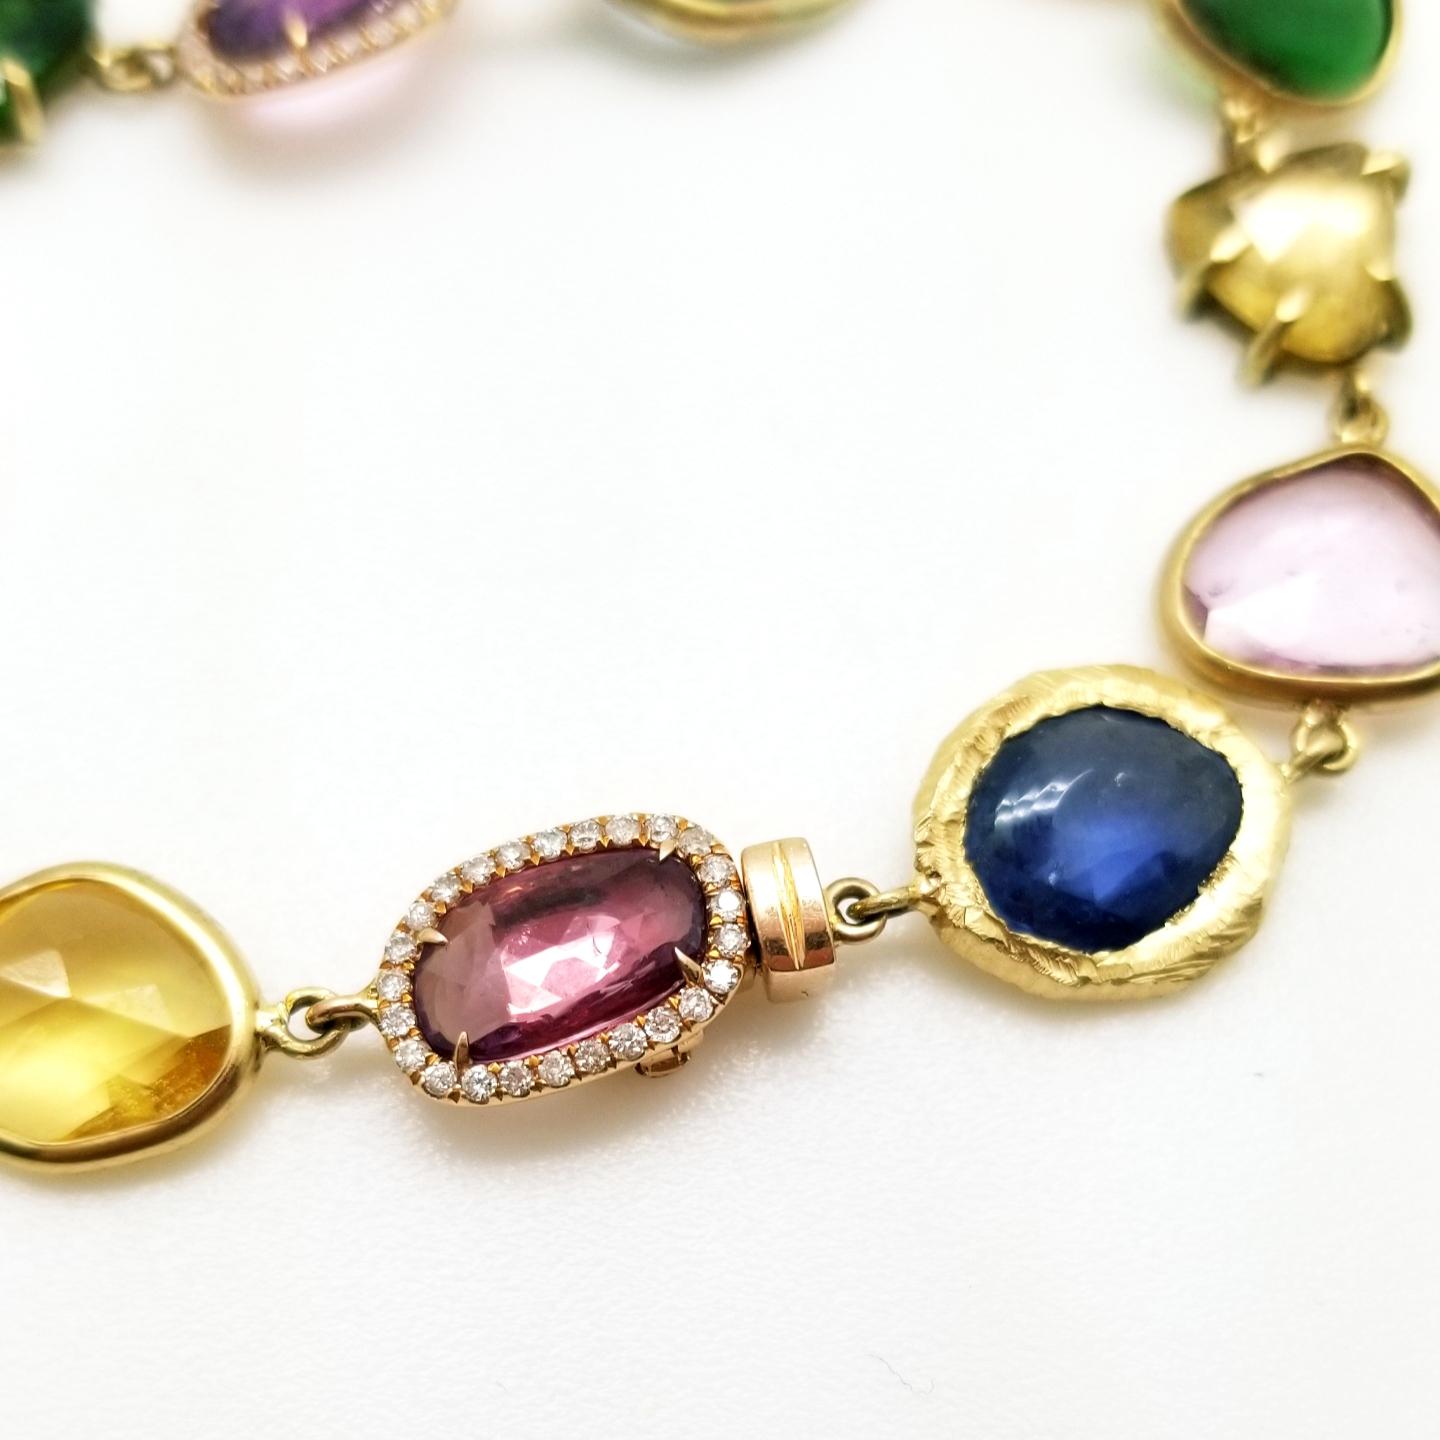 Women's 18KT Gold Bracelet with diamonds, tsavorites and blue, pink and yellow sapphires